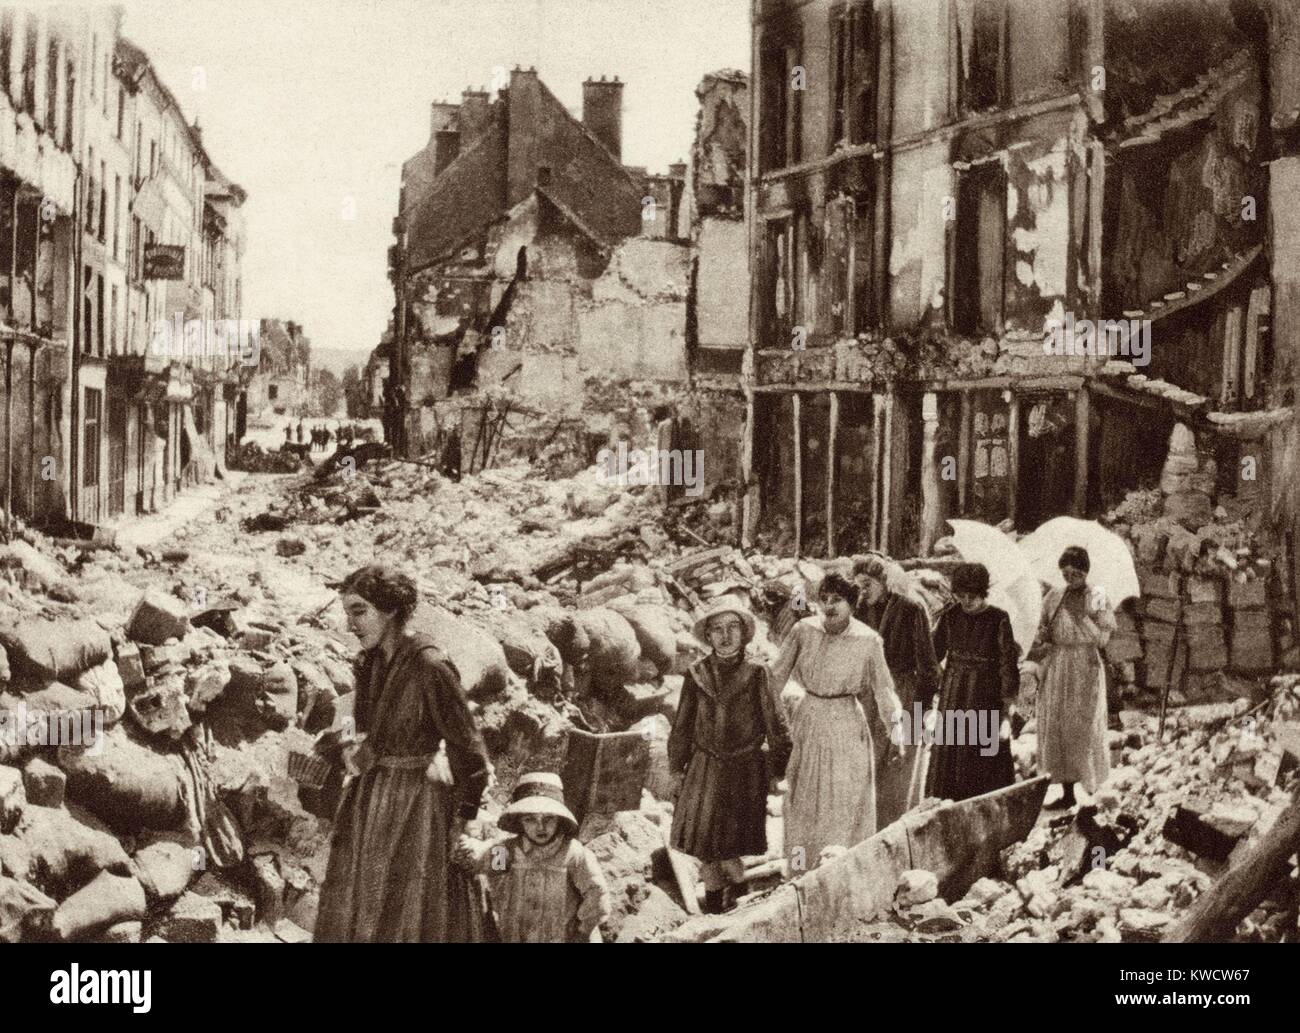 World War 1. Women and children who had been hiding in the cellars of Chateau-Thierry, France, emerging after the Allies liberated the city in July 1918. (BSLOC 2013 1 186) Stock Photo